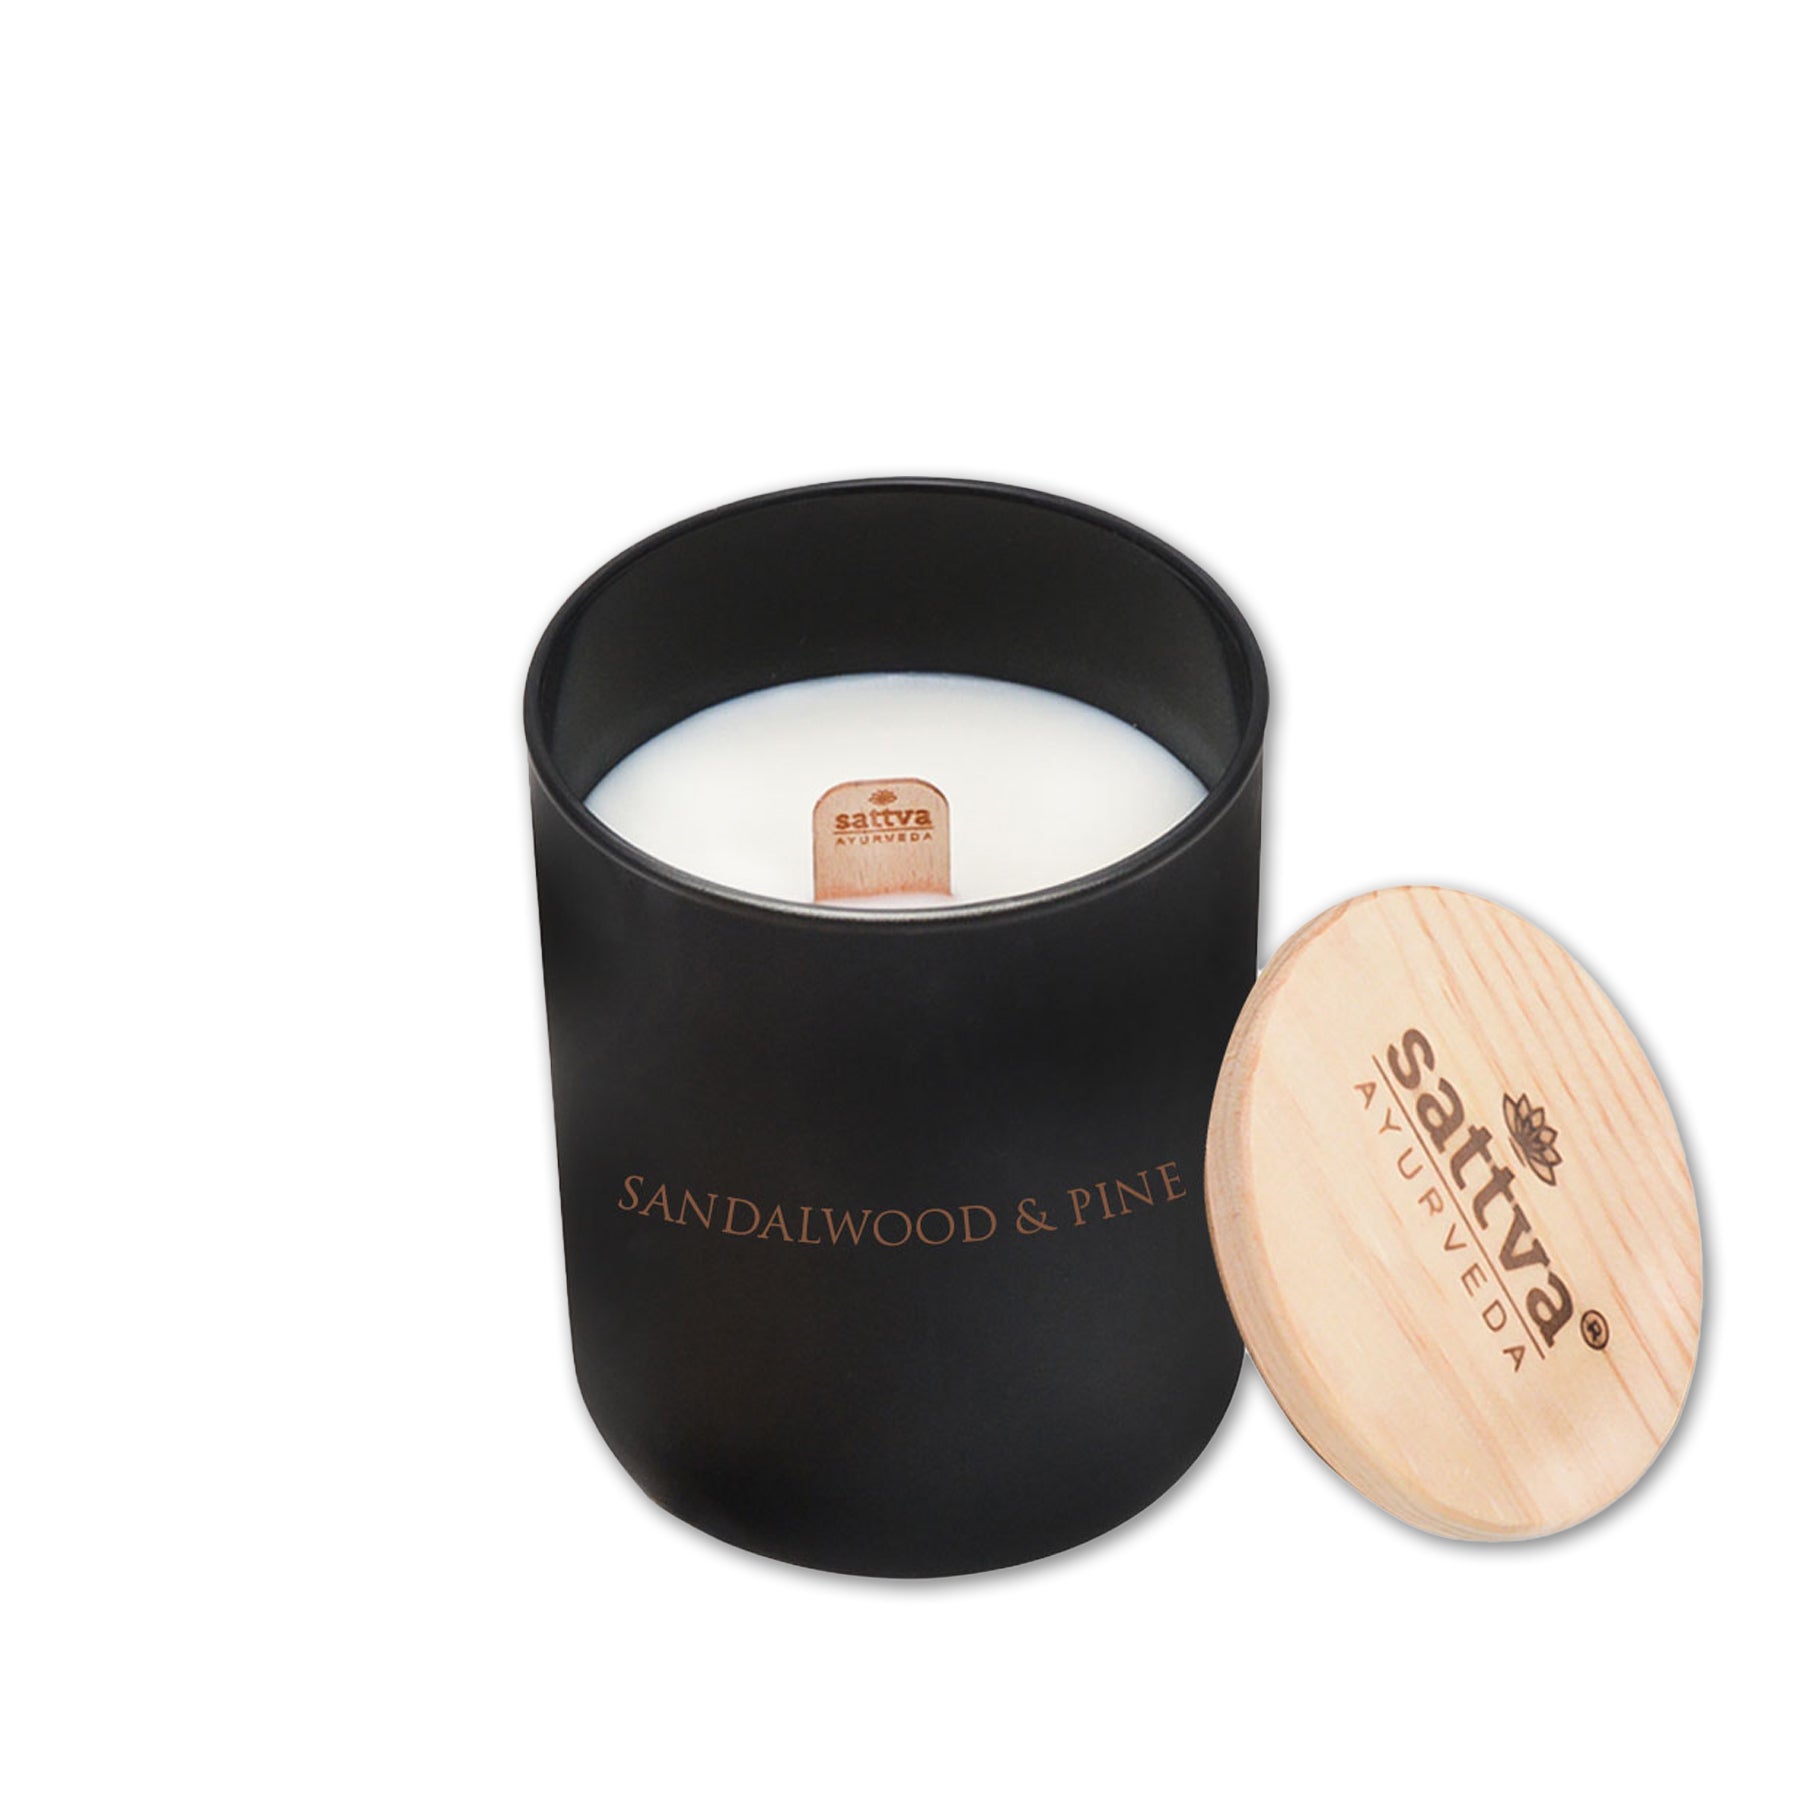 Soy Wax Candle with Sandalwood & Pine Essential Oils